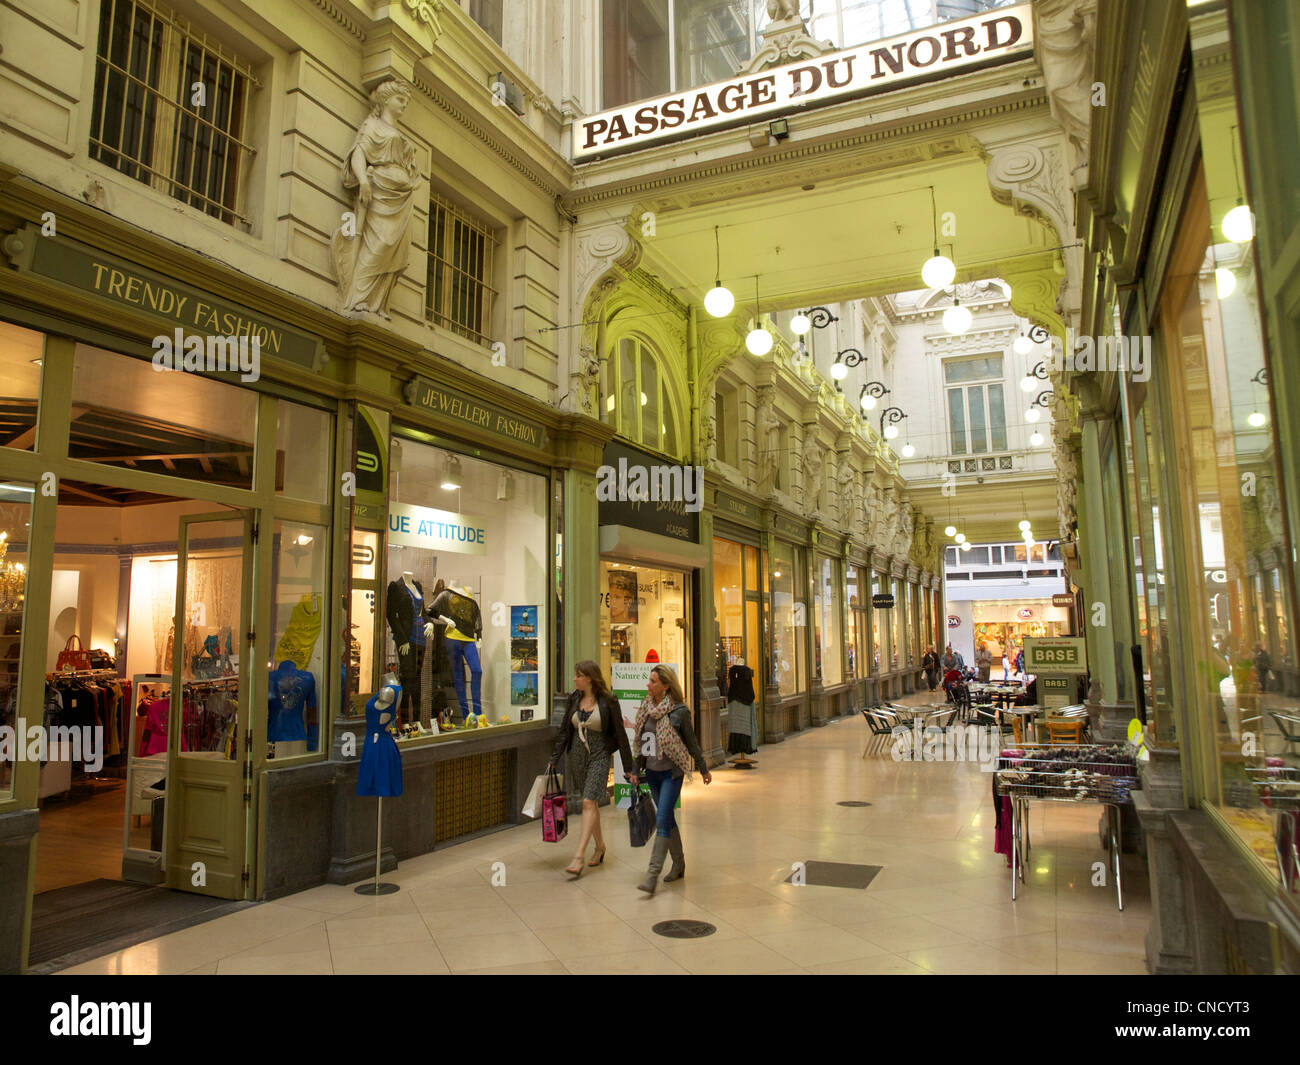 Historic Passage du Nord shopping gallery mall in Brussels, Belgium Stock Photo